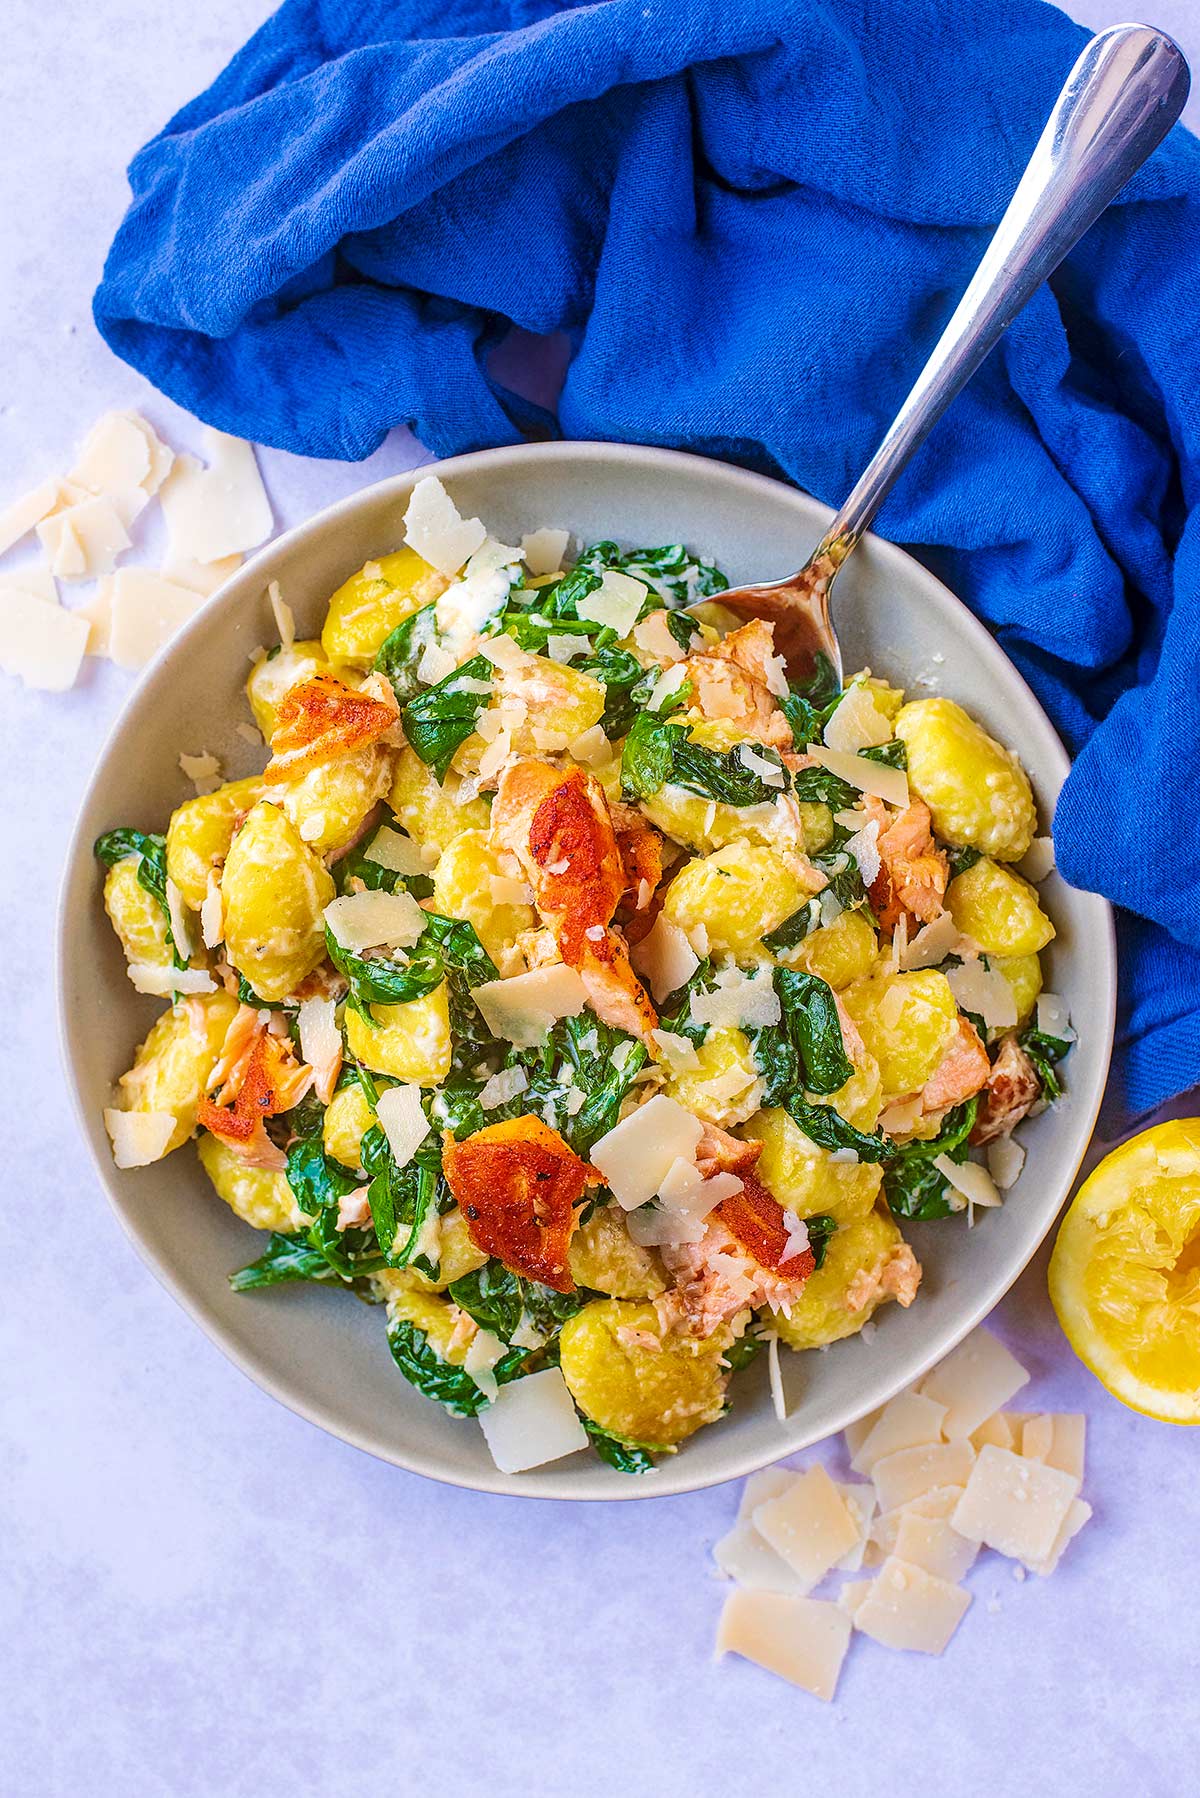 A bowl of gnocchi mixed with salmon and spinach next to a blue towel.